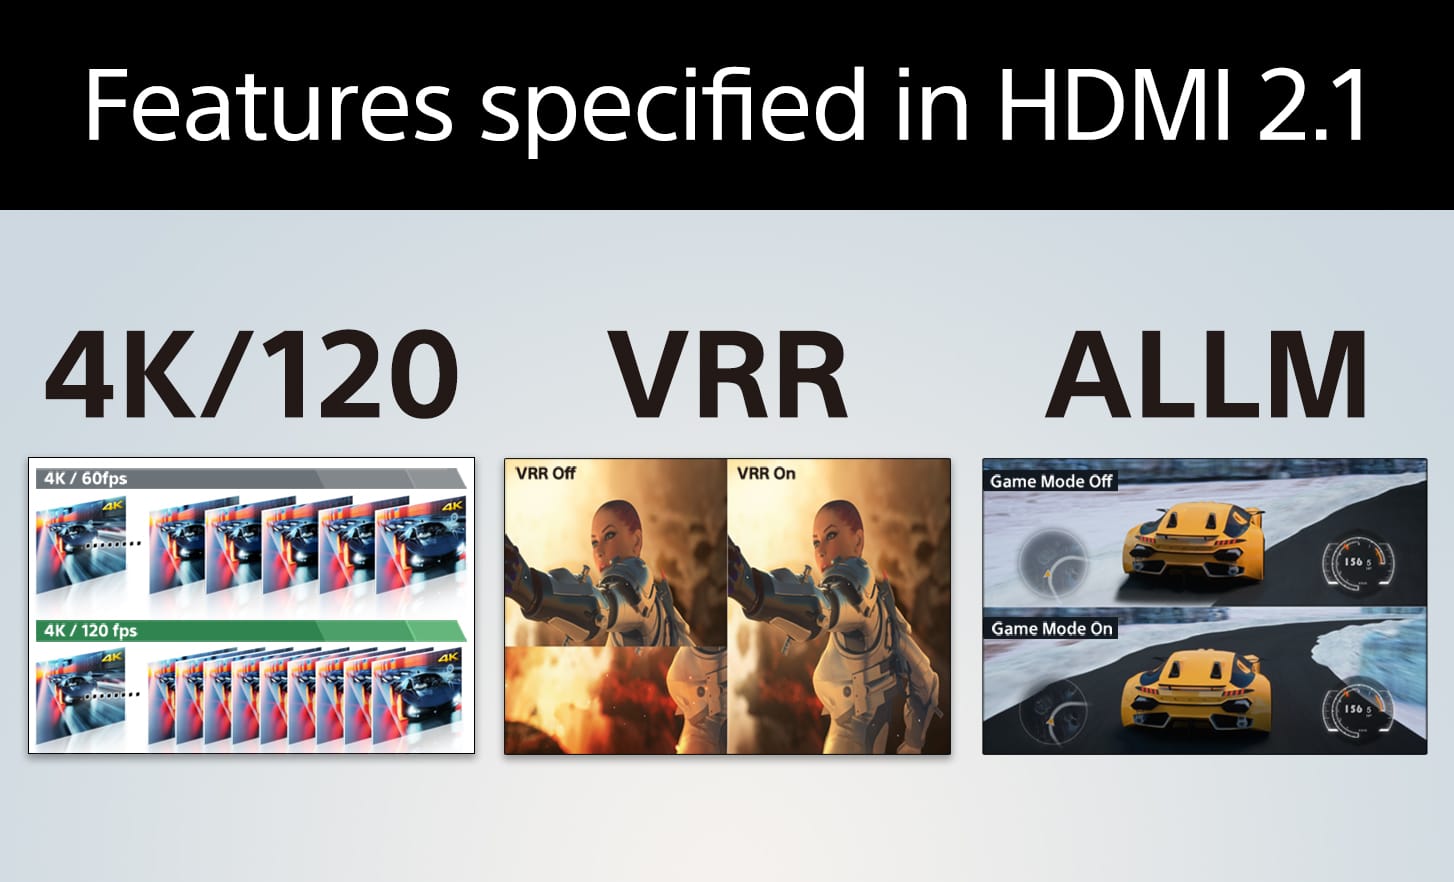 HDMI 2.1 features 4k 120 VRR ALLM